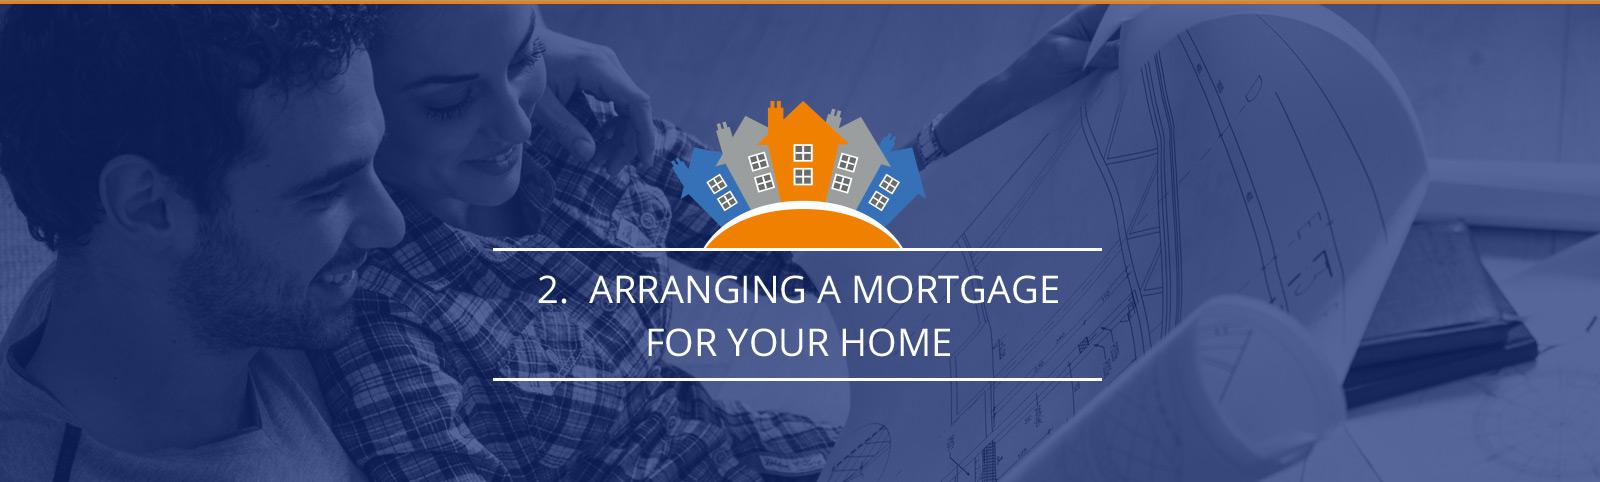 Arranging a mortgage for your home